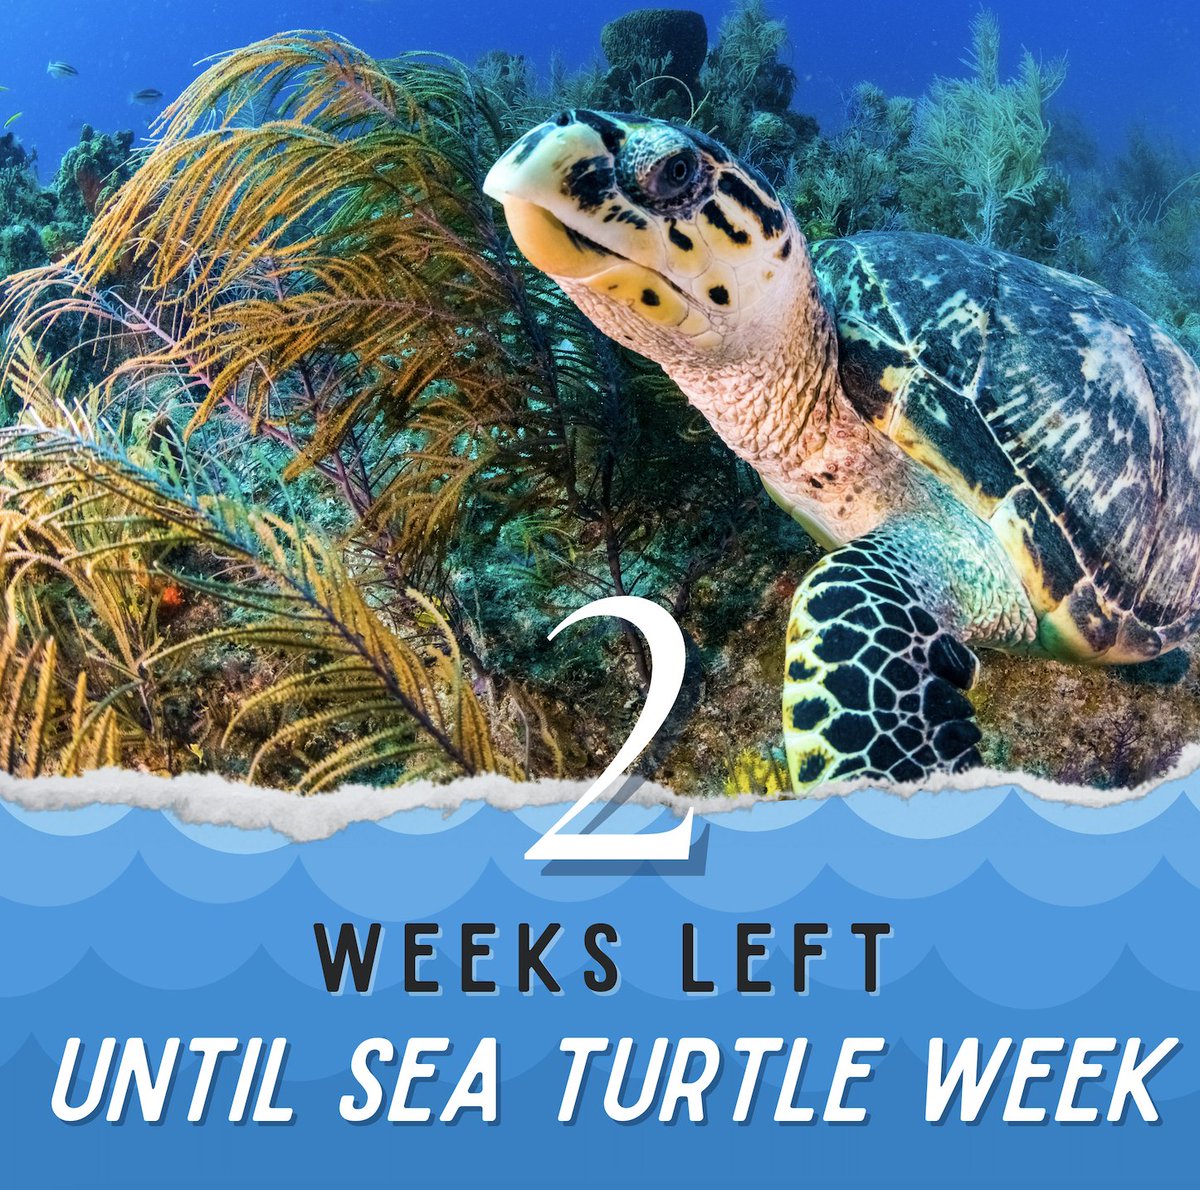 Only 2 weeks left until #SeaTurtleWeek and our team is ready to shellebrate! 

Be sure to head to seaturtleweek.com as well to download the ready made social media graphics, view the trailer to the video series, download a turtley cute coloring sheet, and so much more!